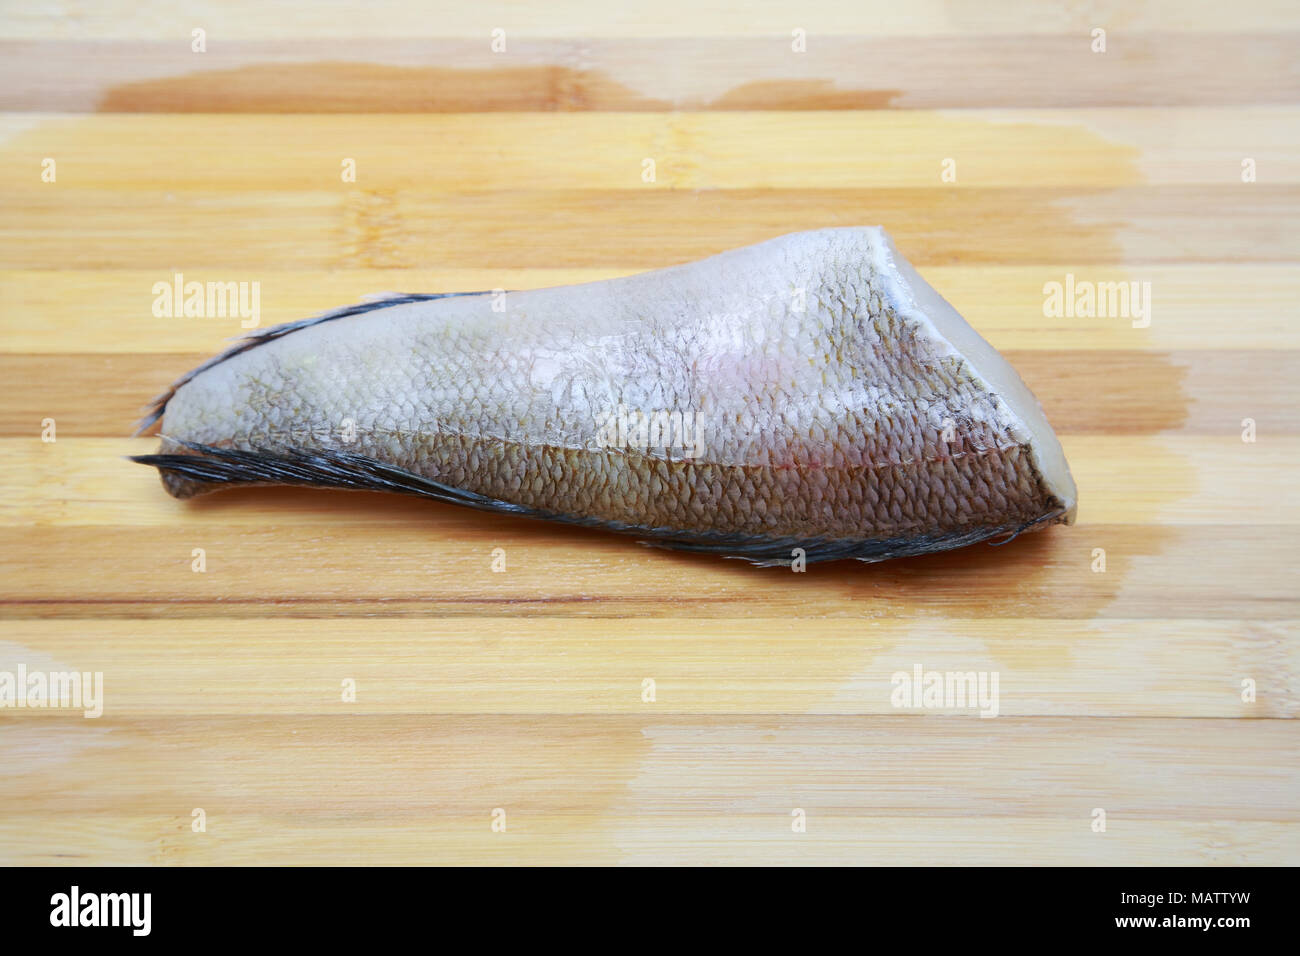 Fish notothenia on a cutting board close-up Stock Photo